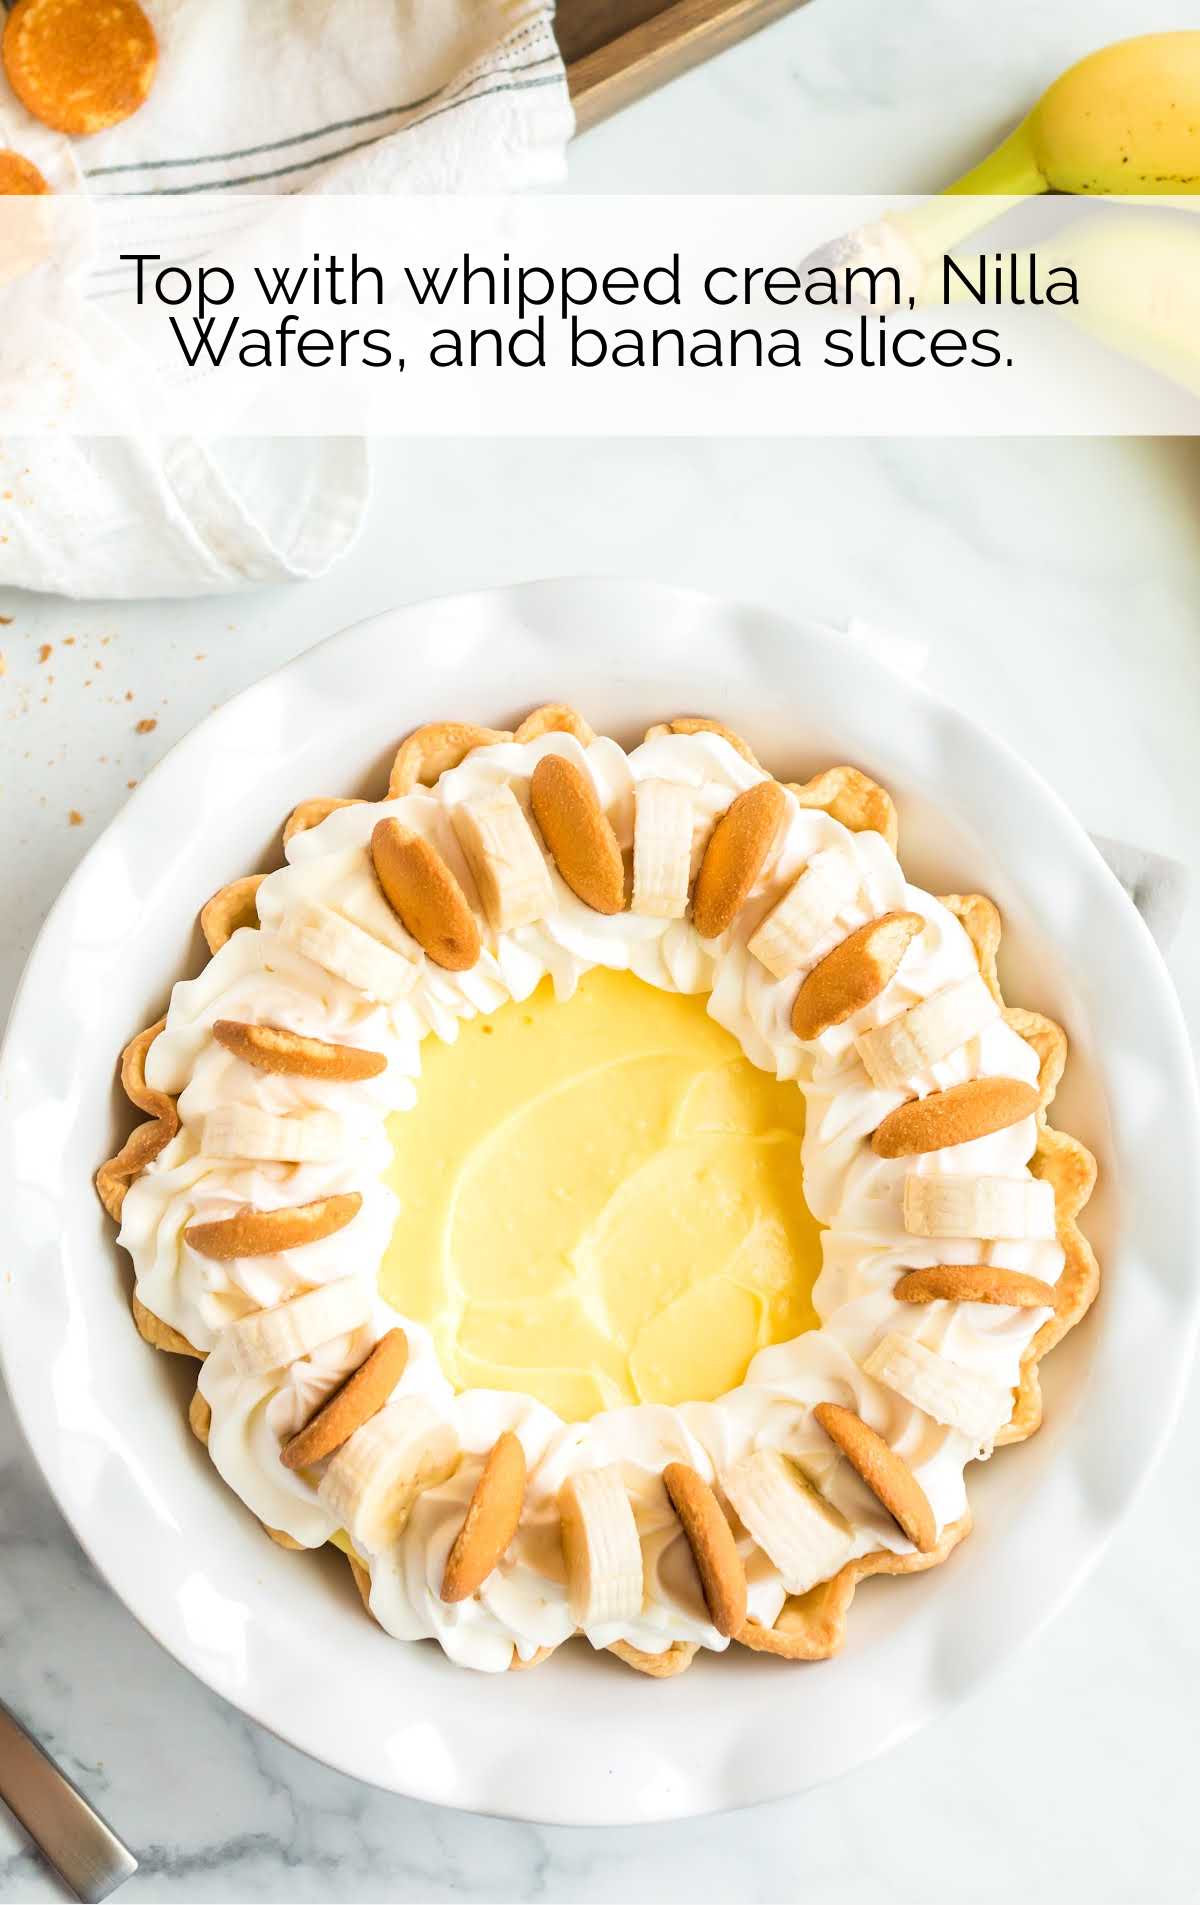 whipped cream, Vanilla wafers and banana slices put on top of the pie